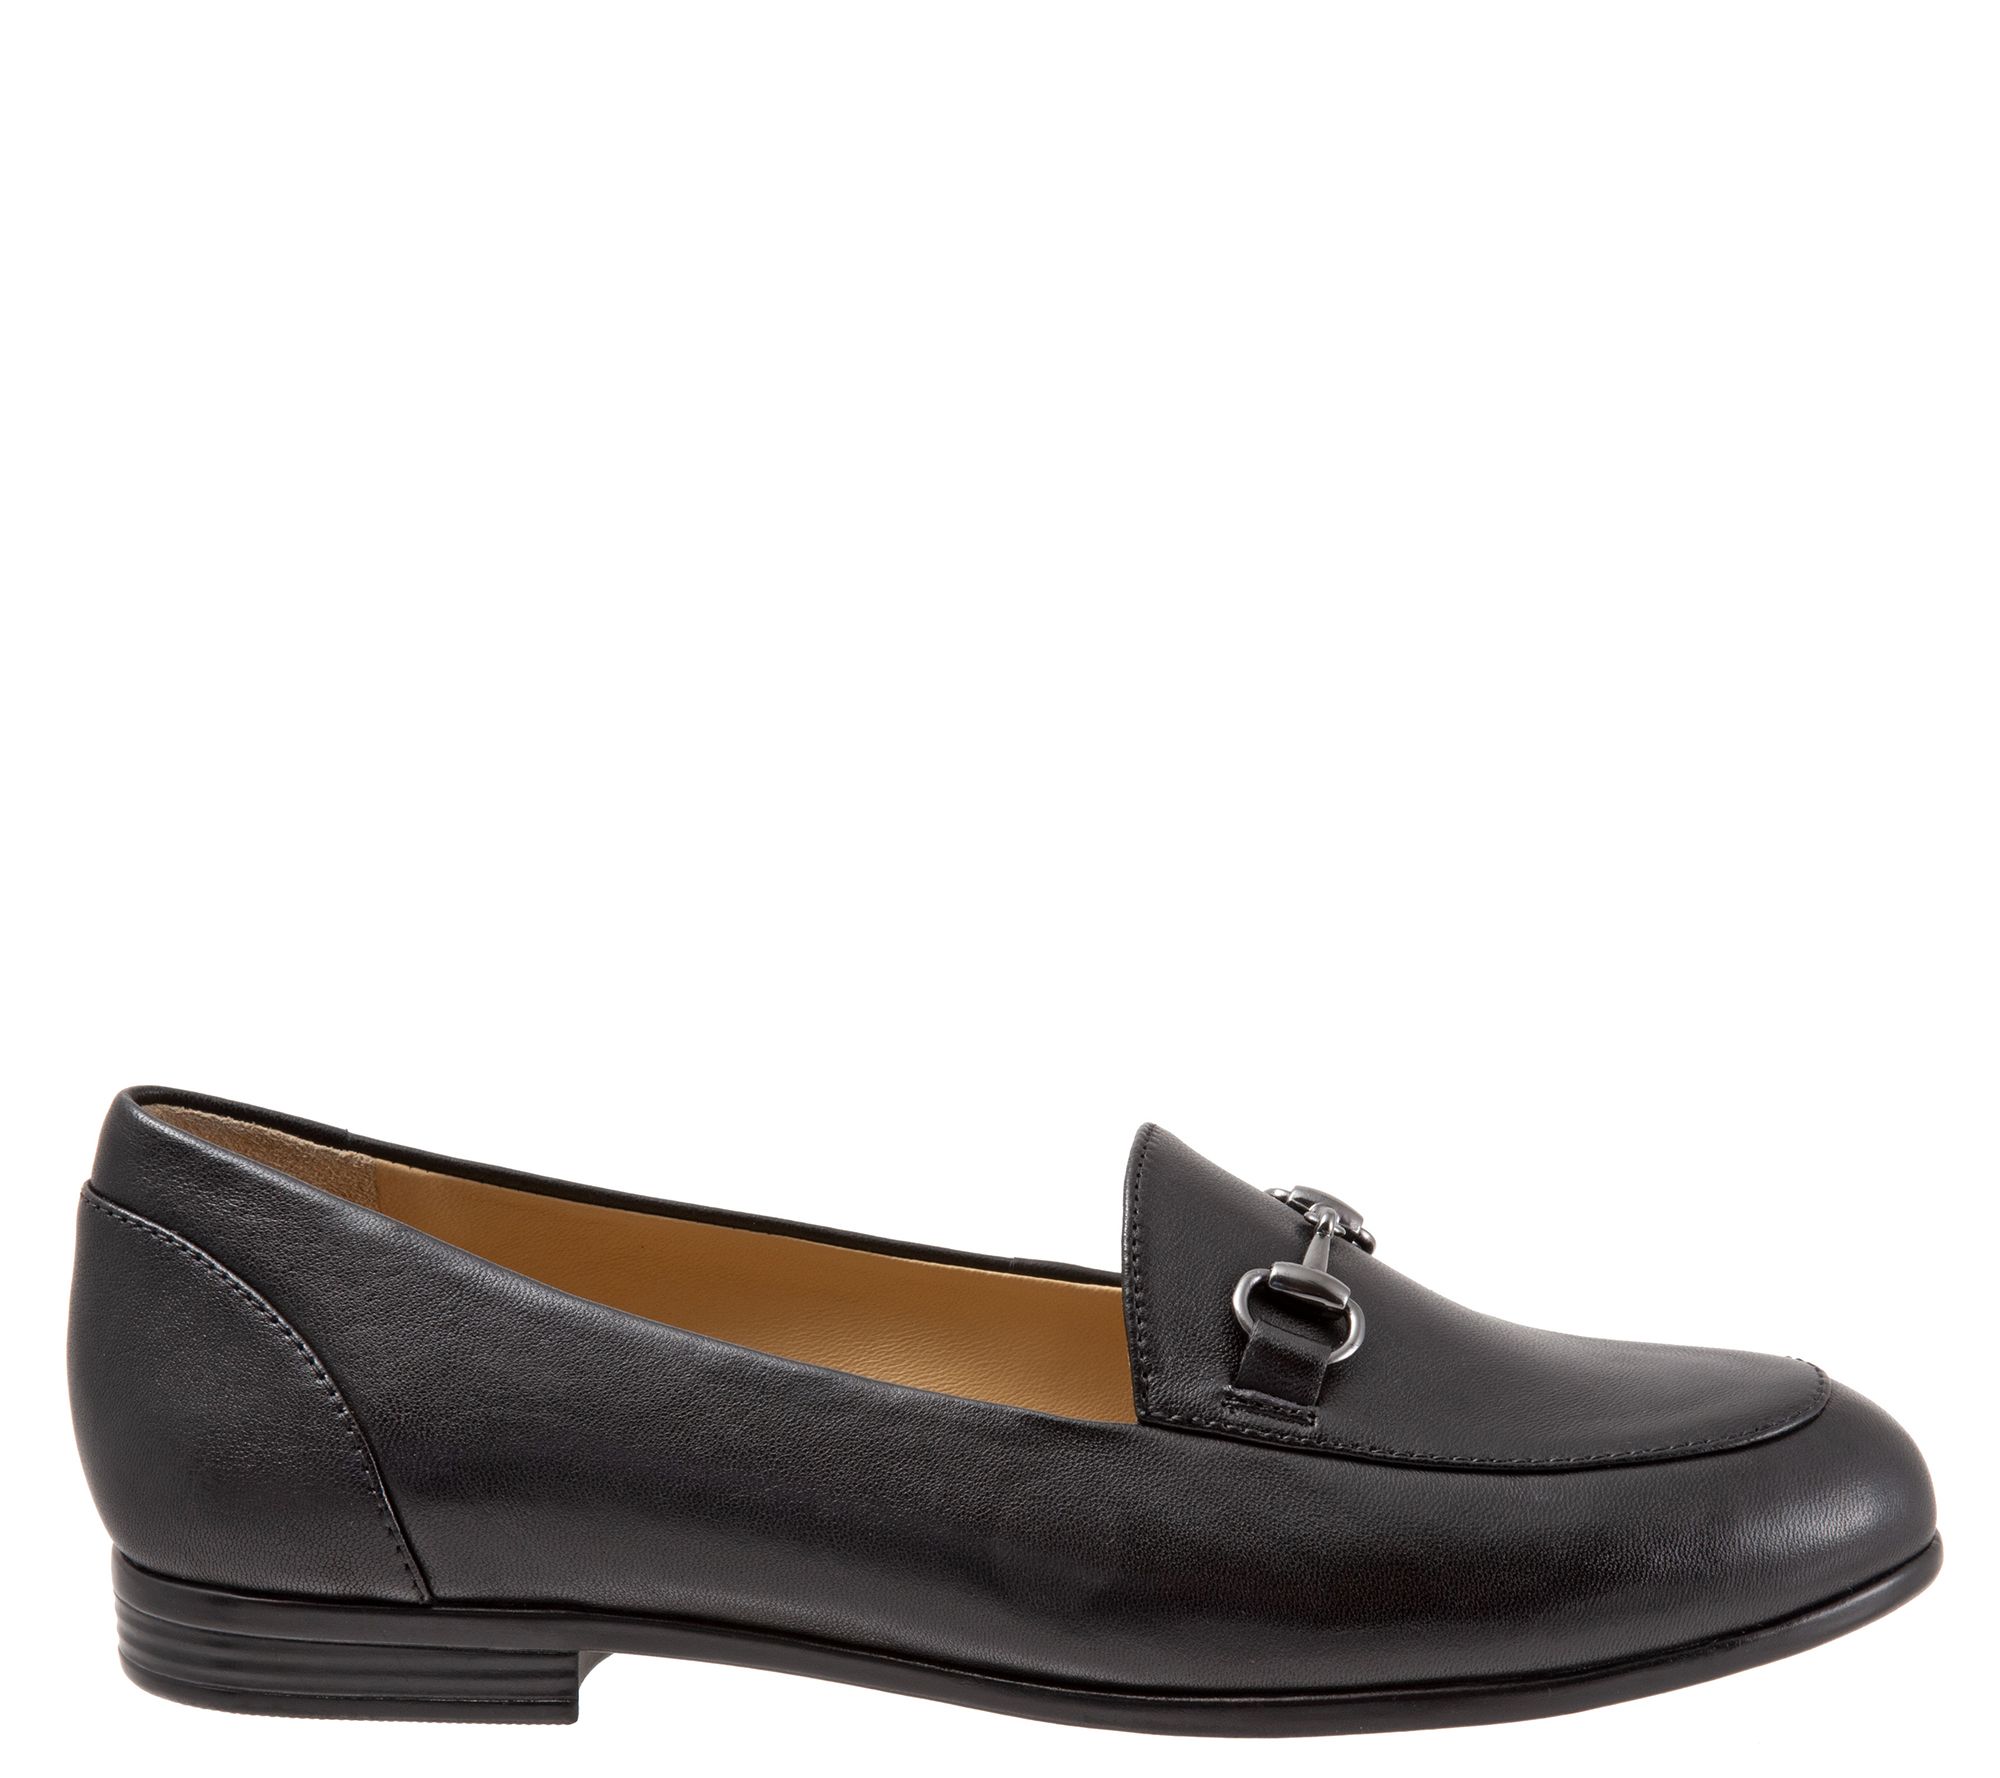 Trotters Sophisticated Leather Loafers - Anice - QVC.com